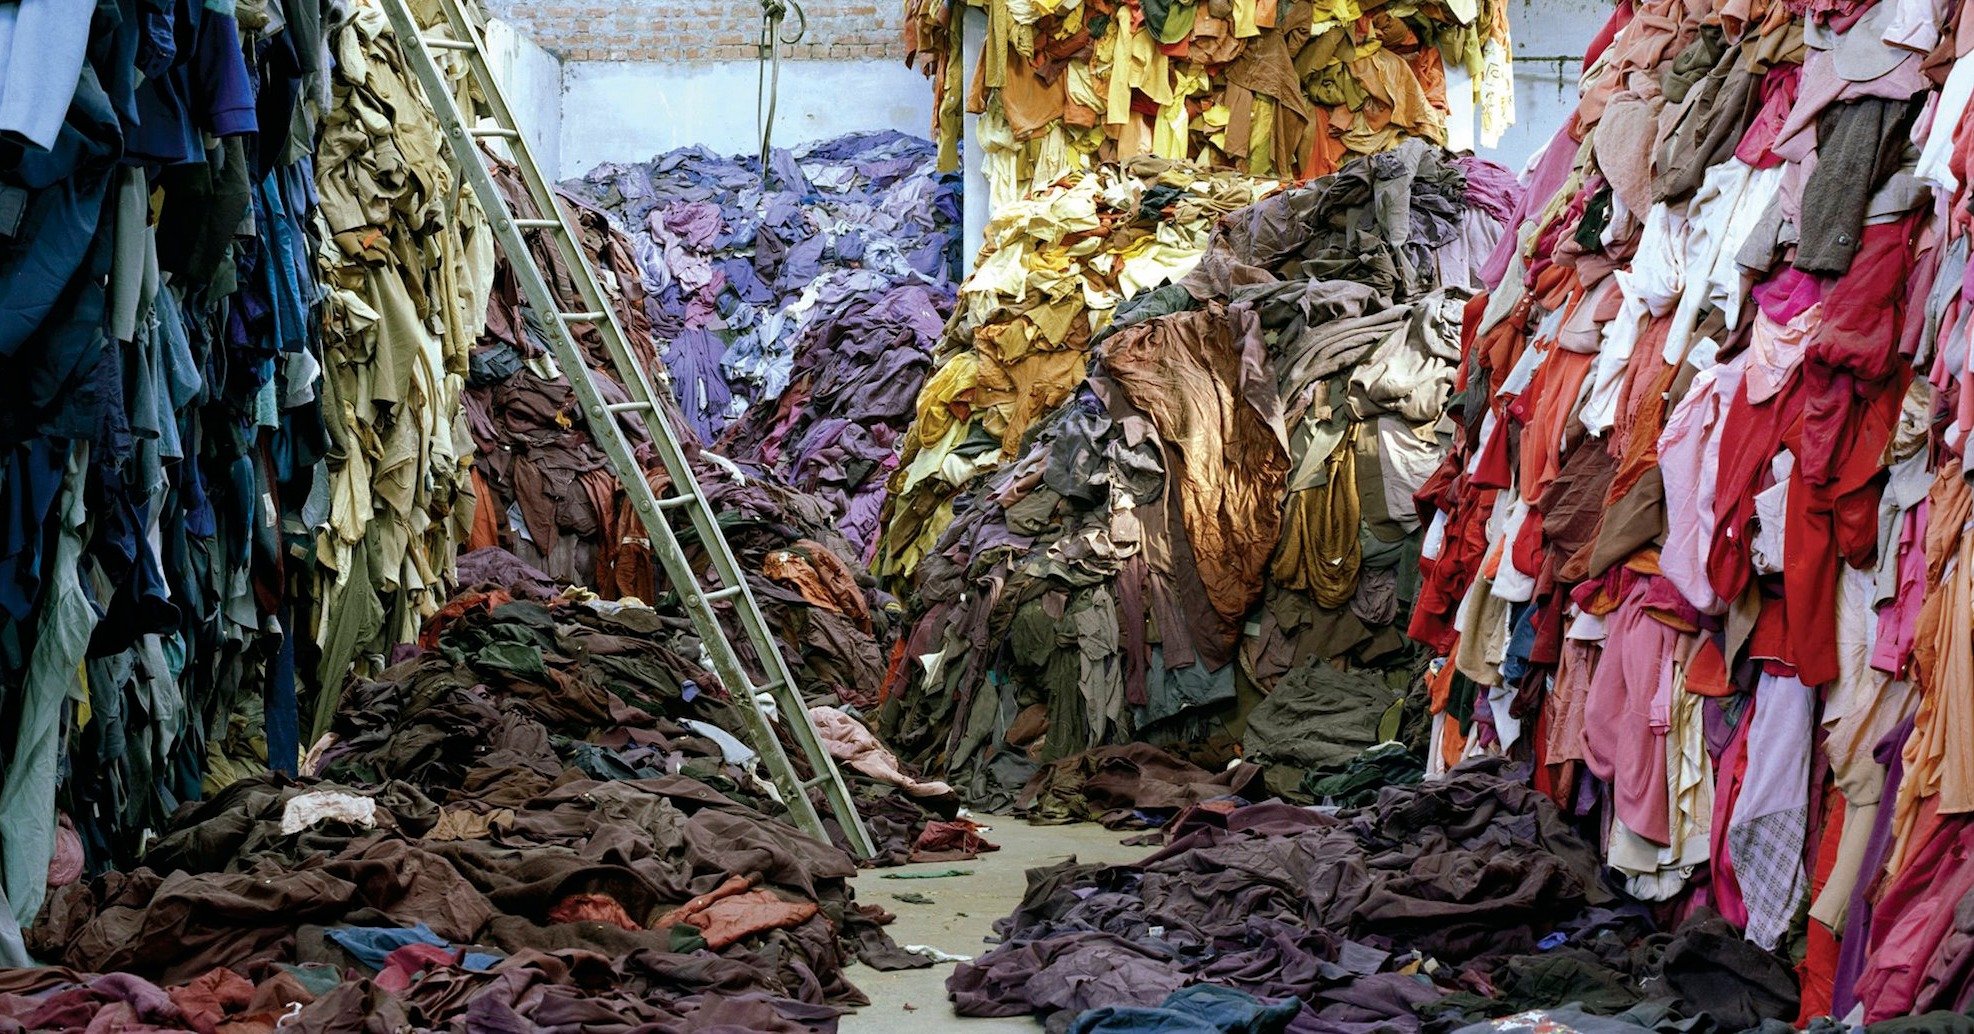 Photograph of clothing waste, organized by color and piled high.